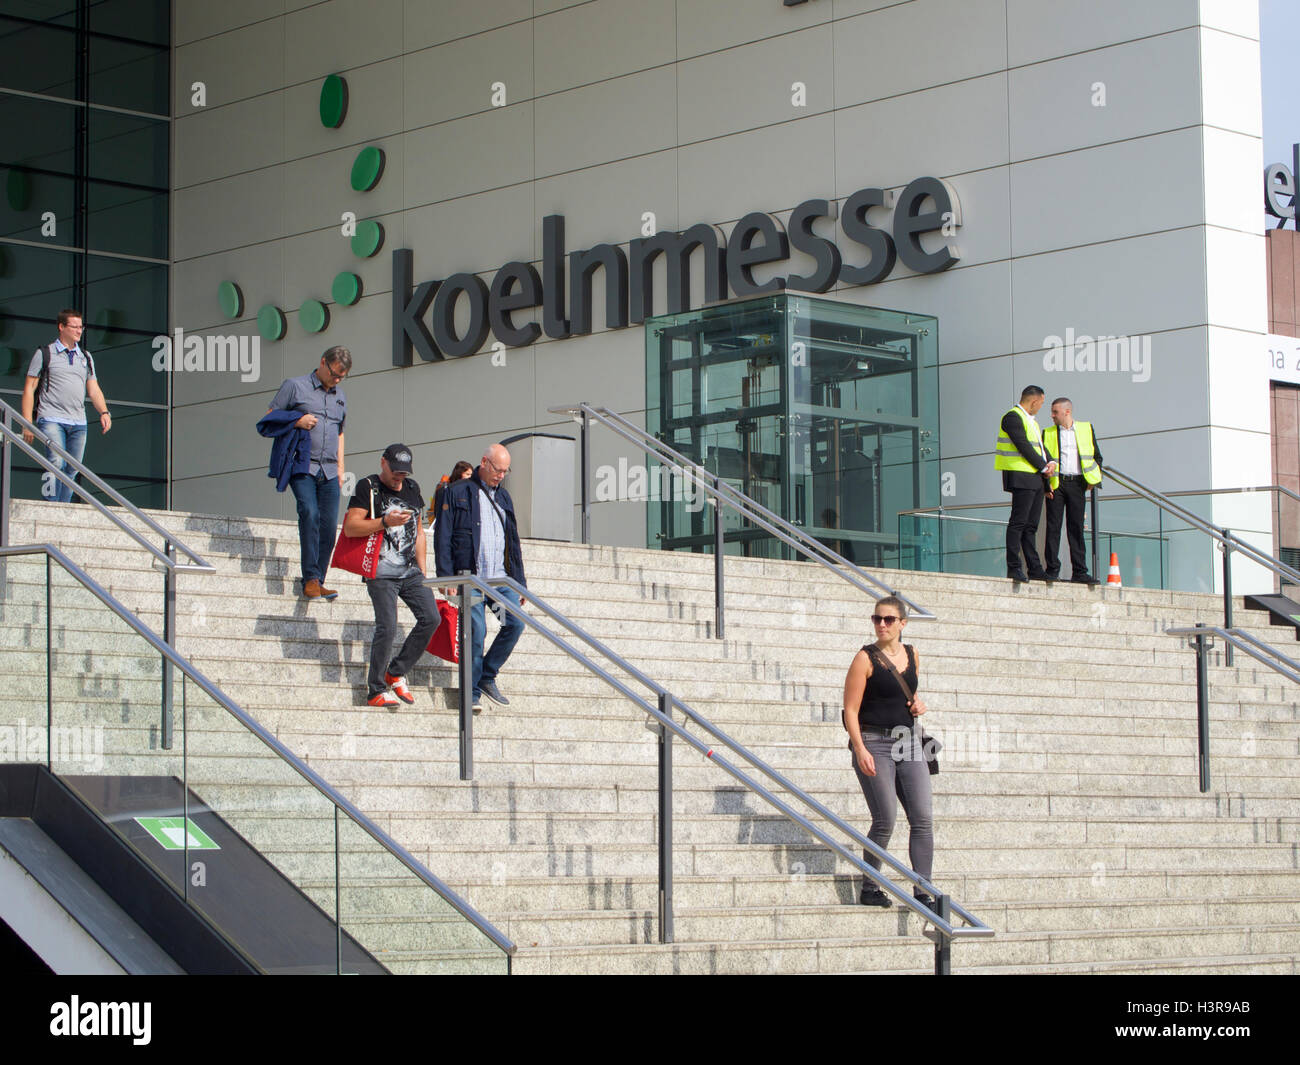 Koeln Messe entrance name sign steps with people in Cologne, Germany Stock Photo